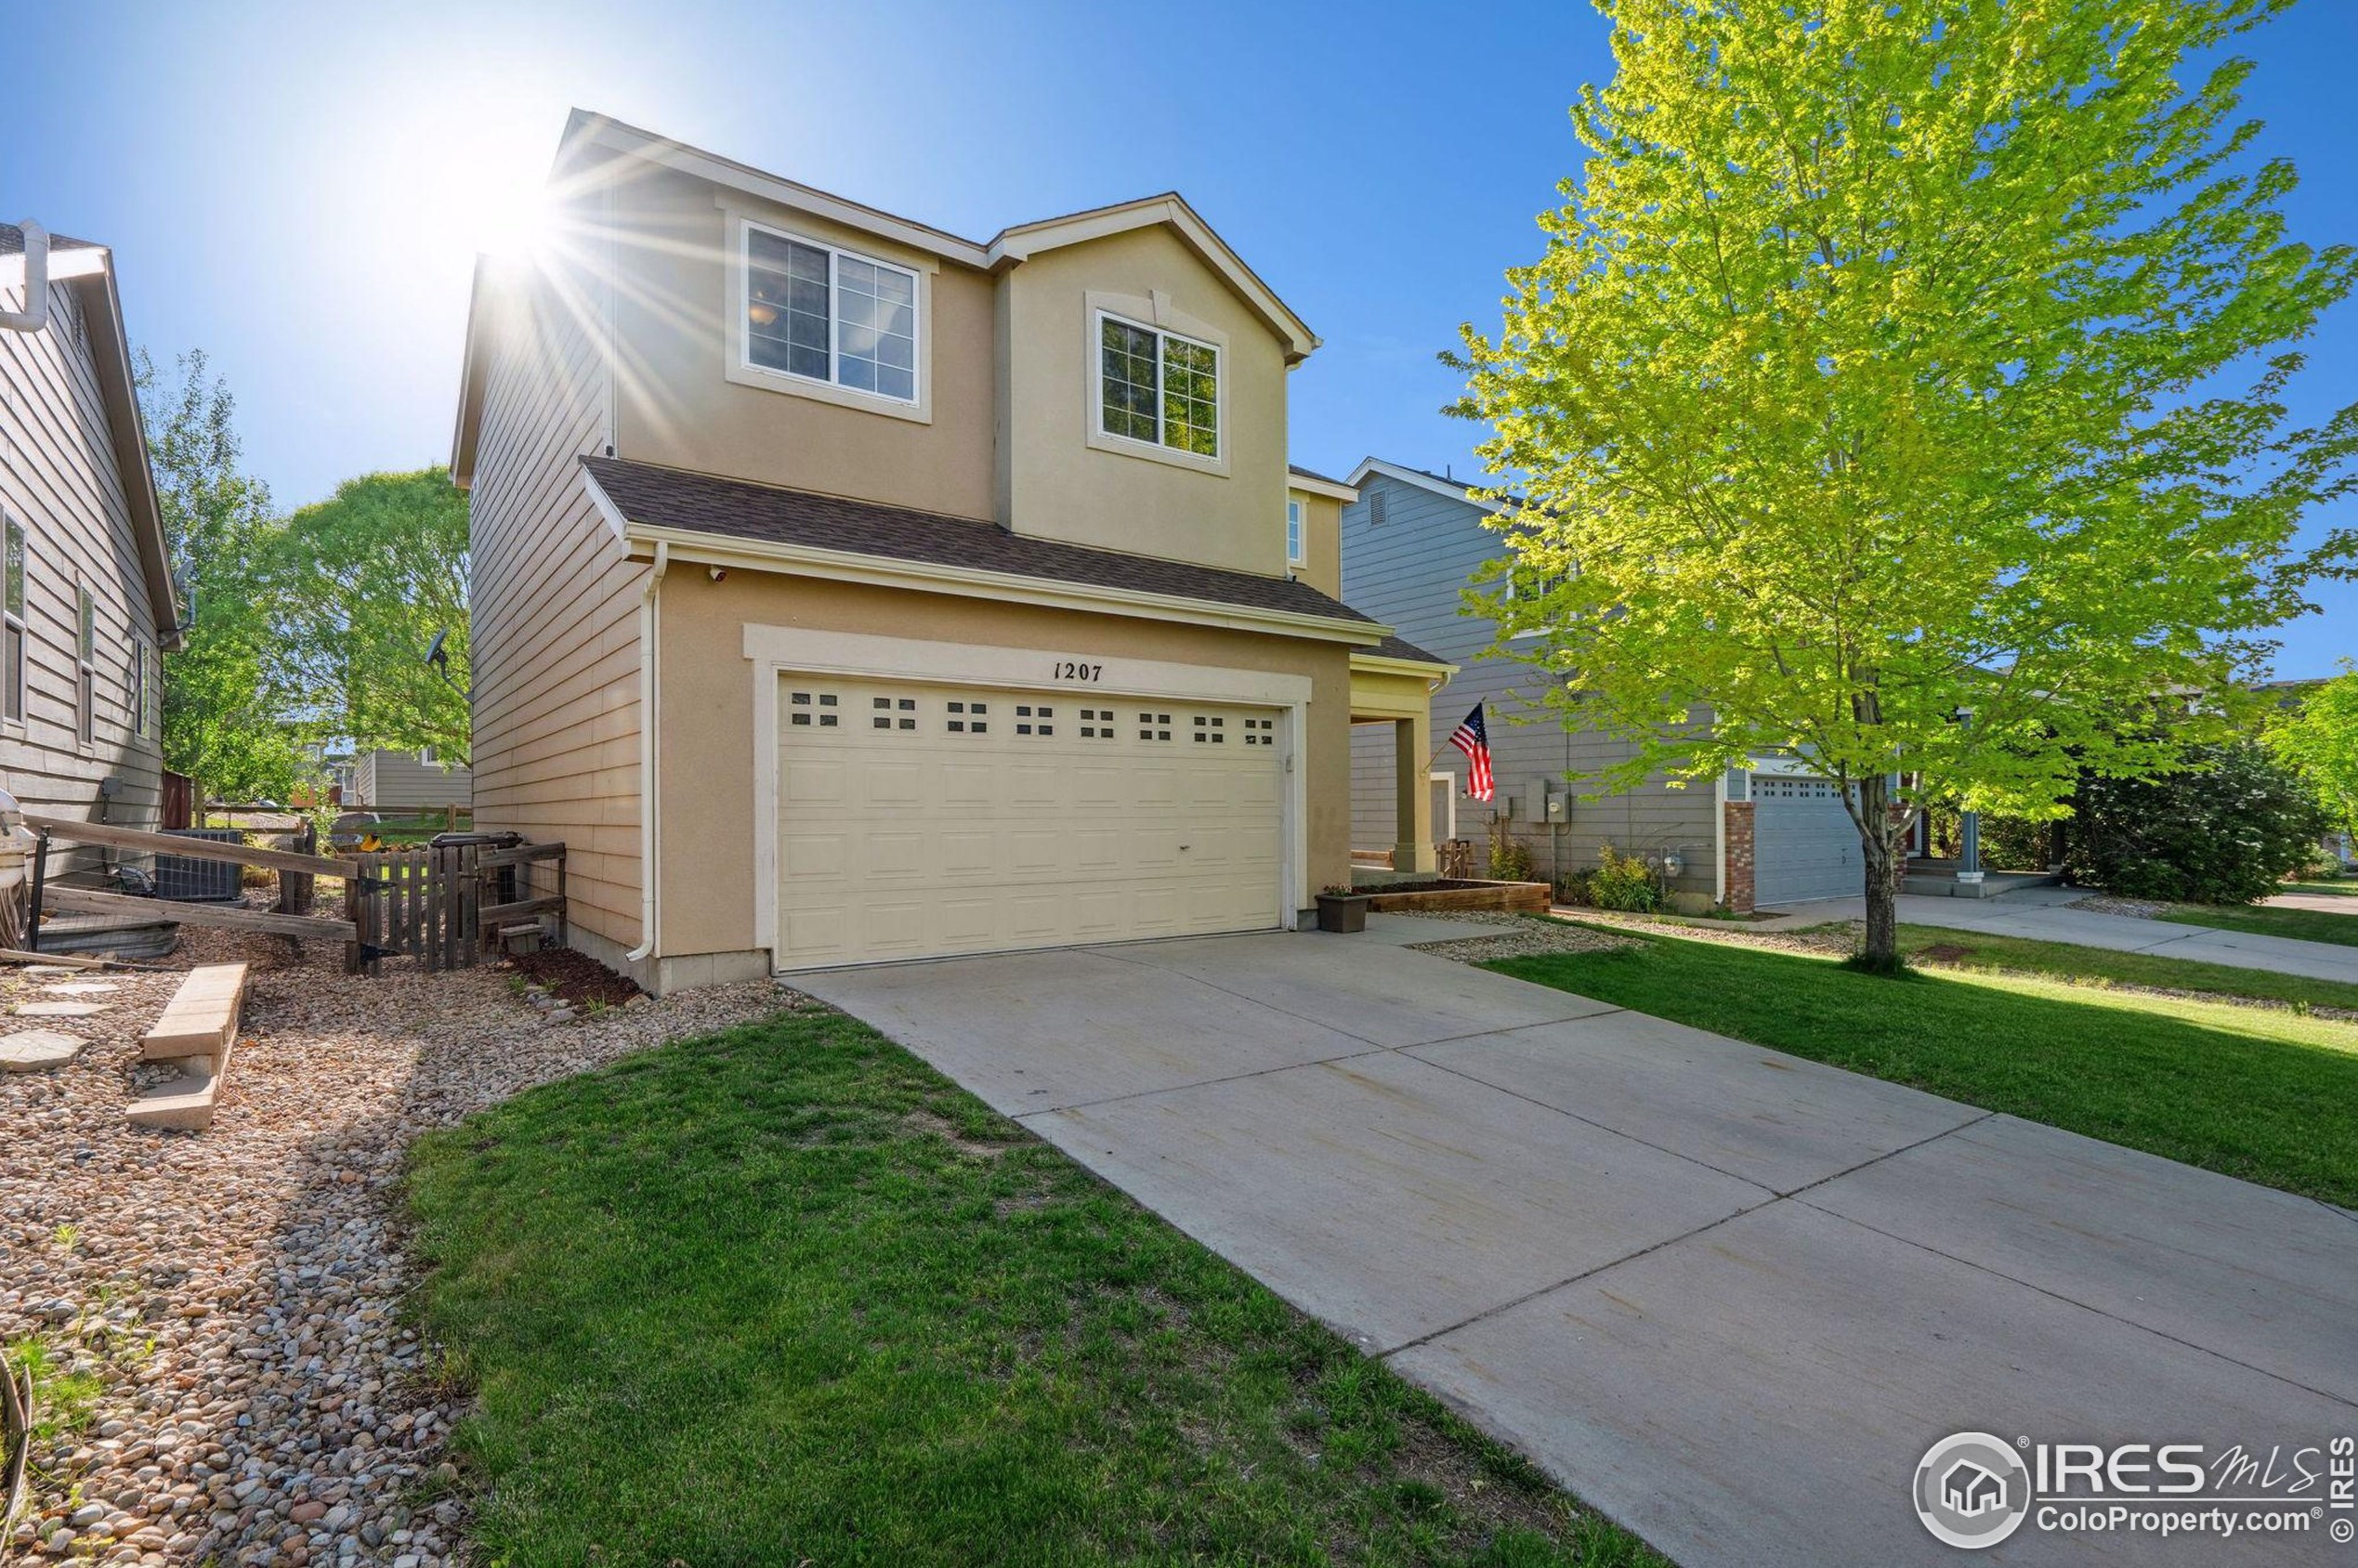 1207 103rd Ave, Greeley, CO 80634